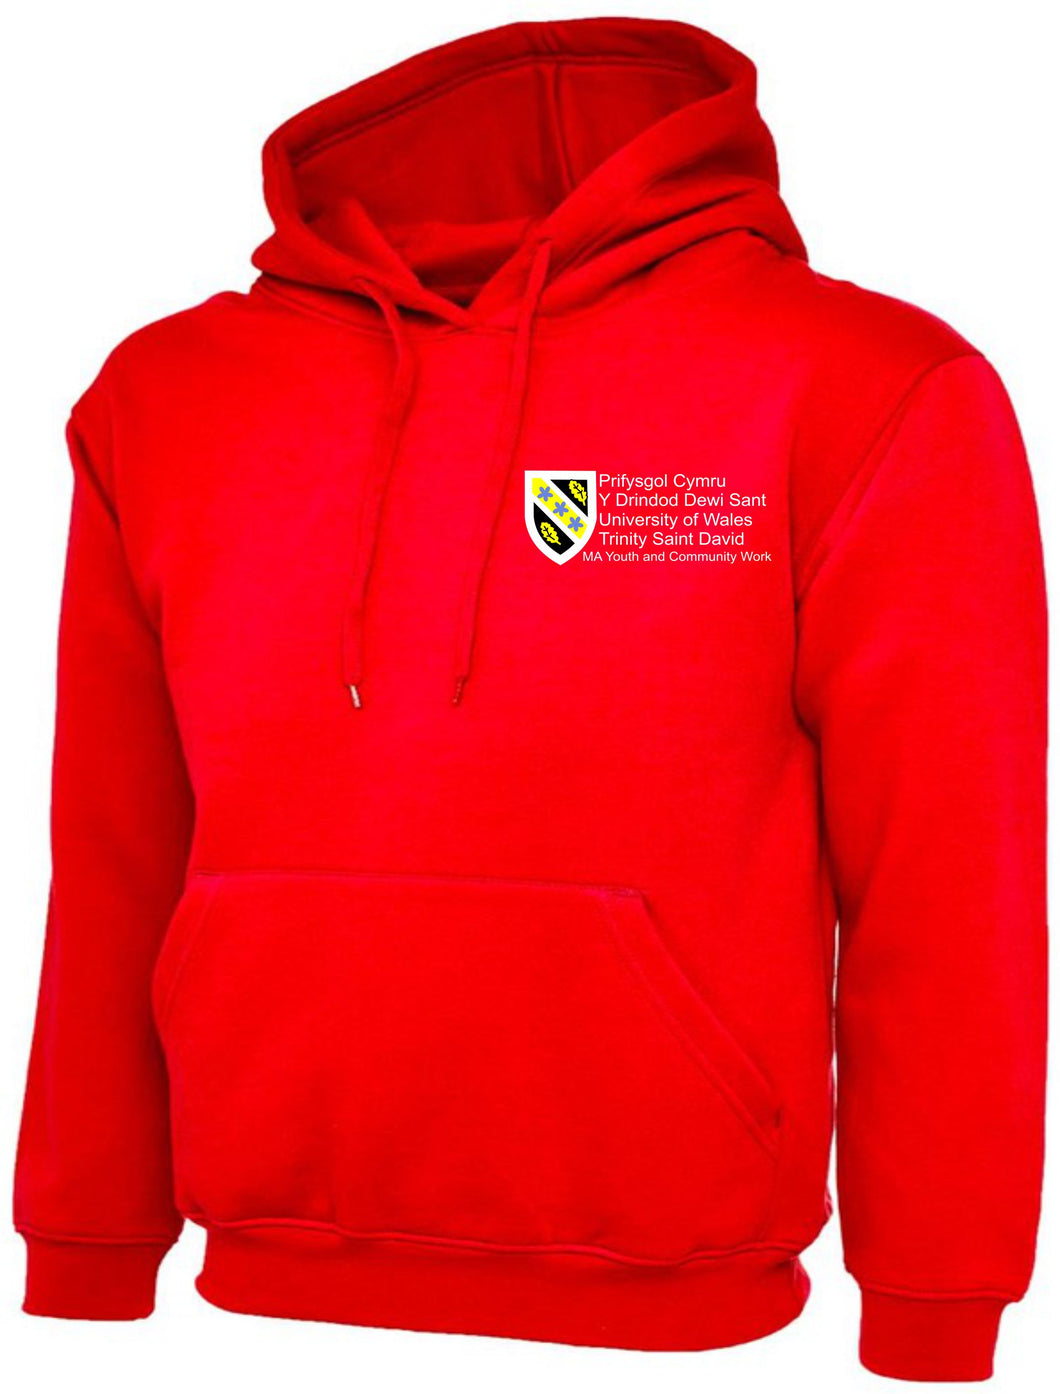 UWTSD MA Youth and Community Work Unisex Hood (No Refunds or Returns)